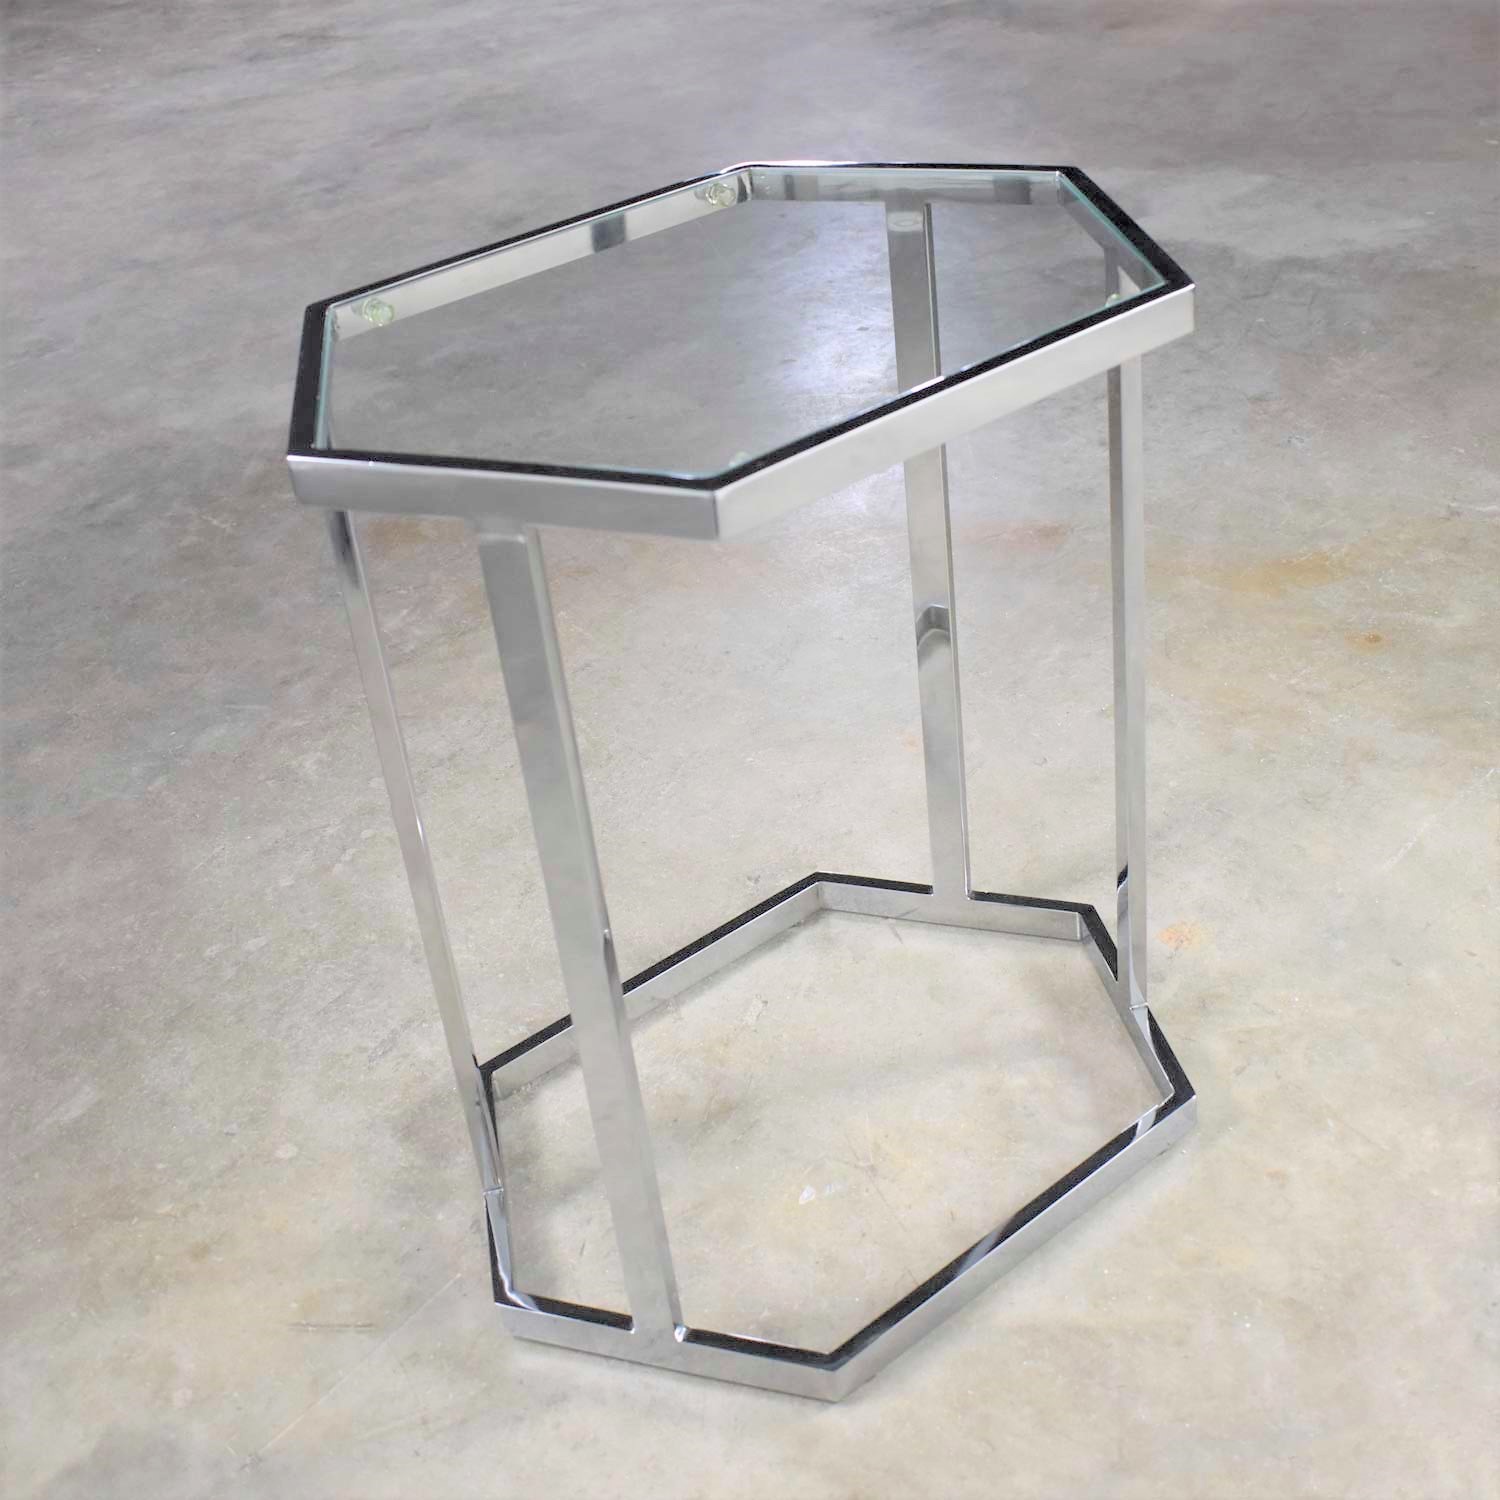 Vintage Modern Chrome and Glass Hexagon Petite Side Table or Occasional Table